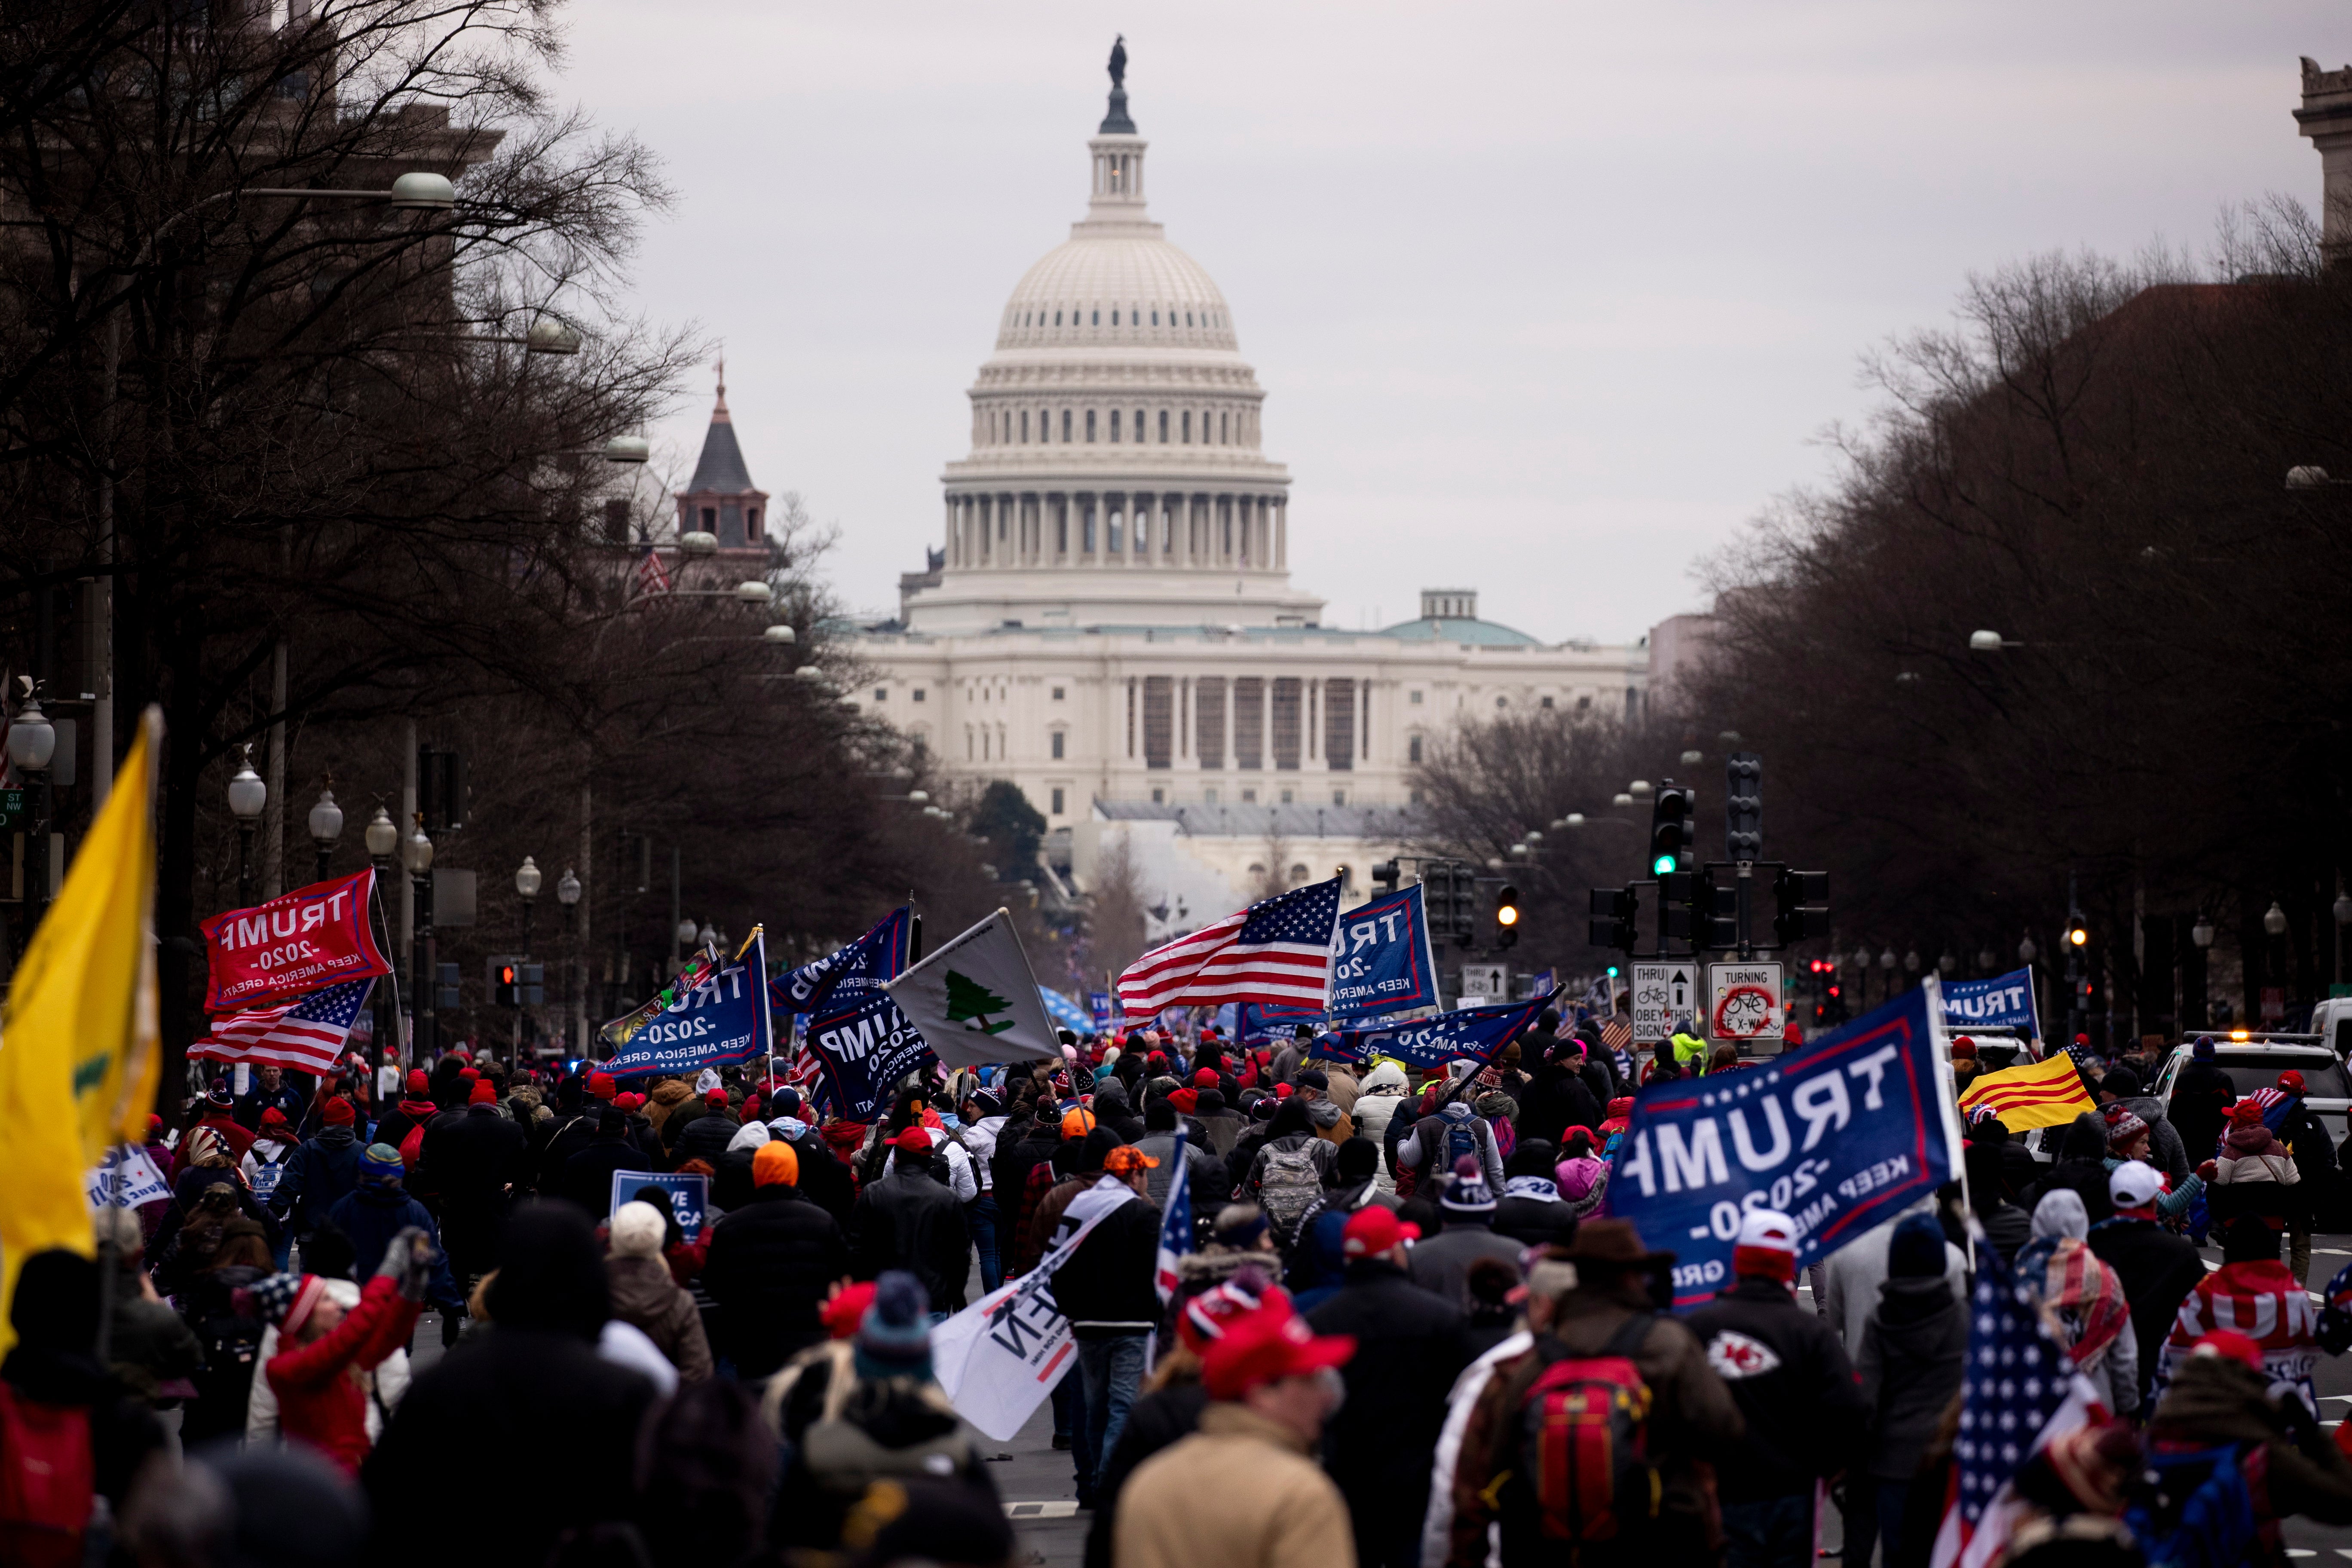 Pro-Trump protesters march down Pennsylvania Avenue to the US Capitol (seen behind) in Washington, DC, 6 January 2021